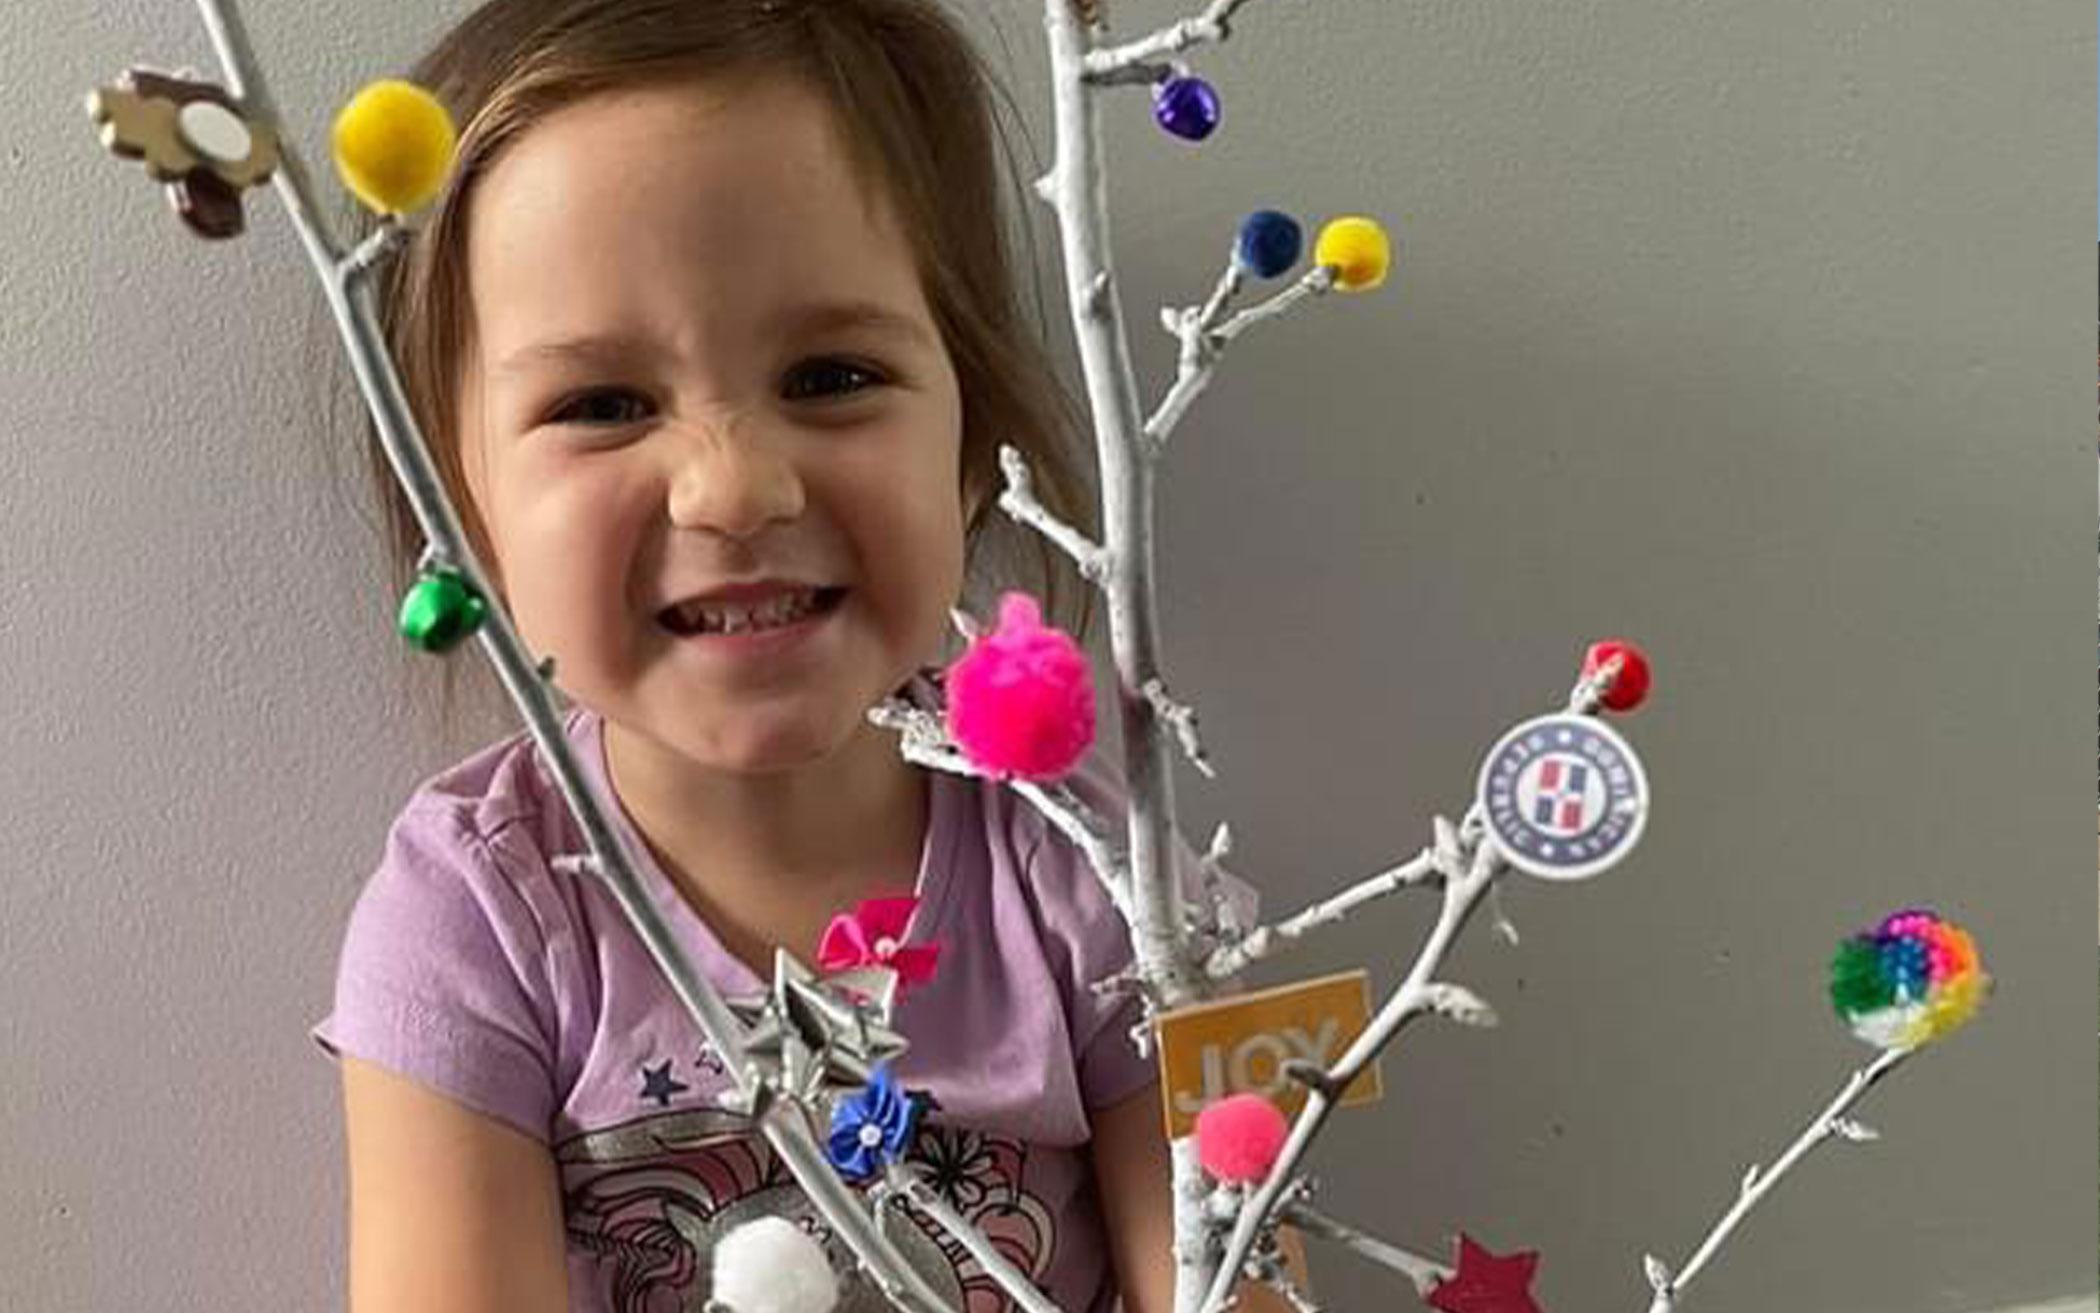 Naomi, 3, with the Charamico tree, a craft for the Dominican Republic Advent celebration week.